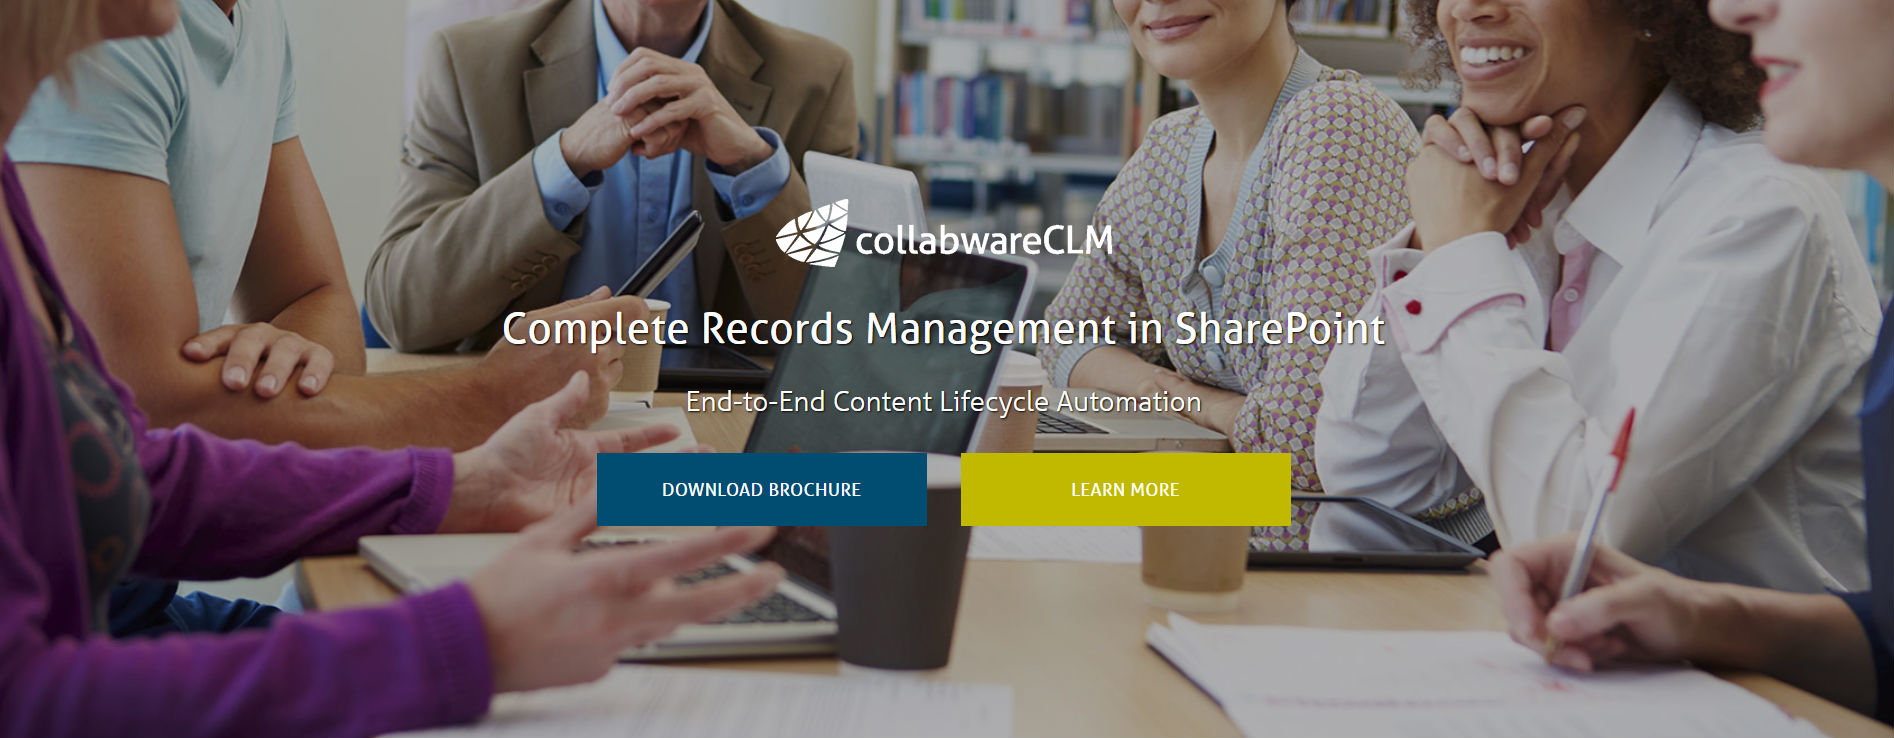 Collabware CLM for Complete Records Management in SharePoint